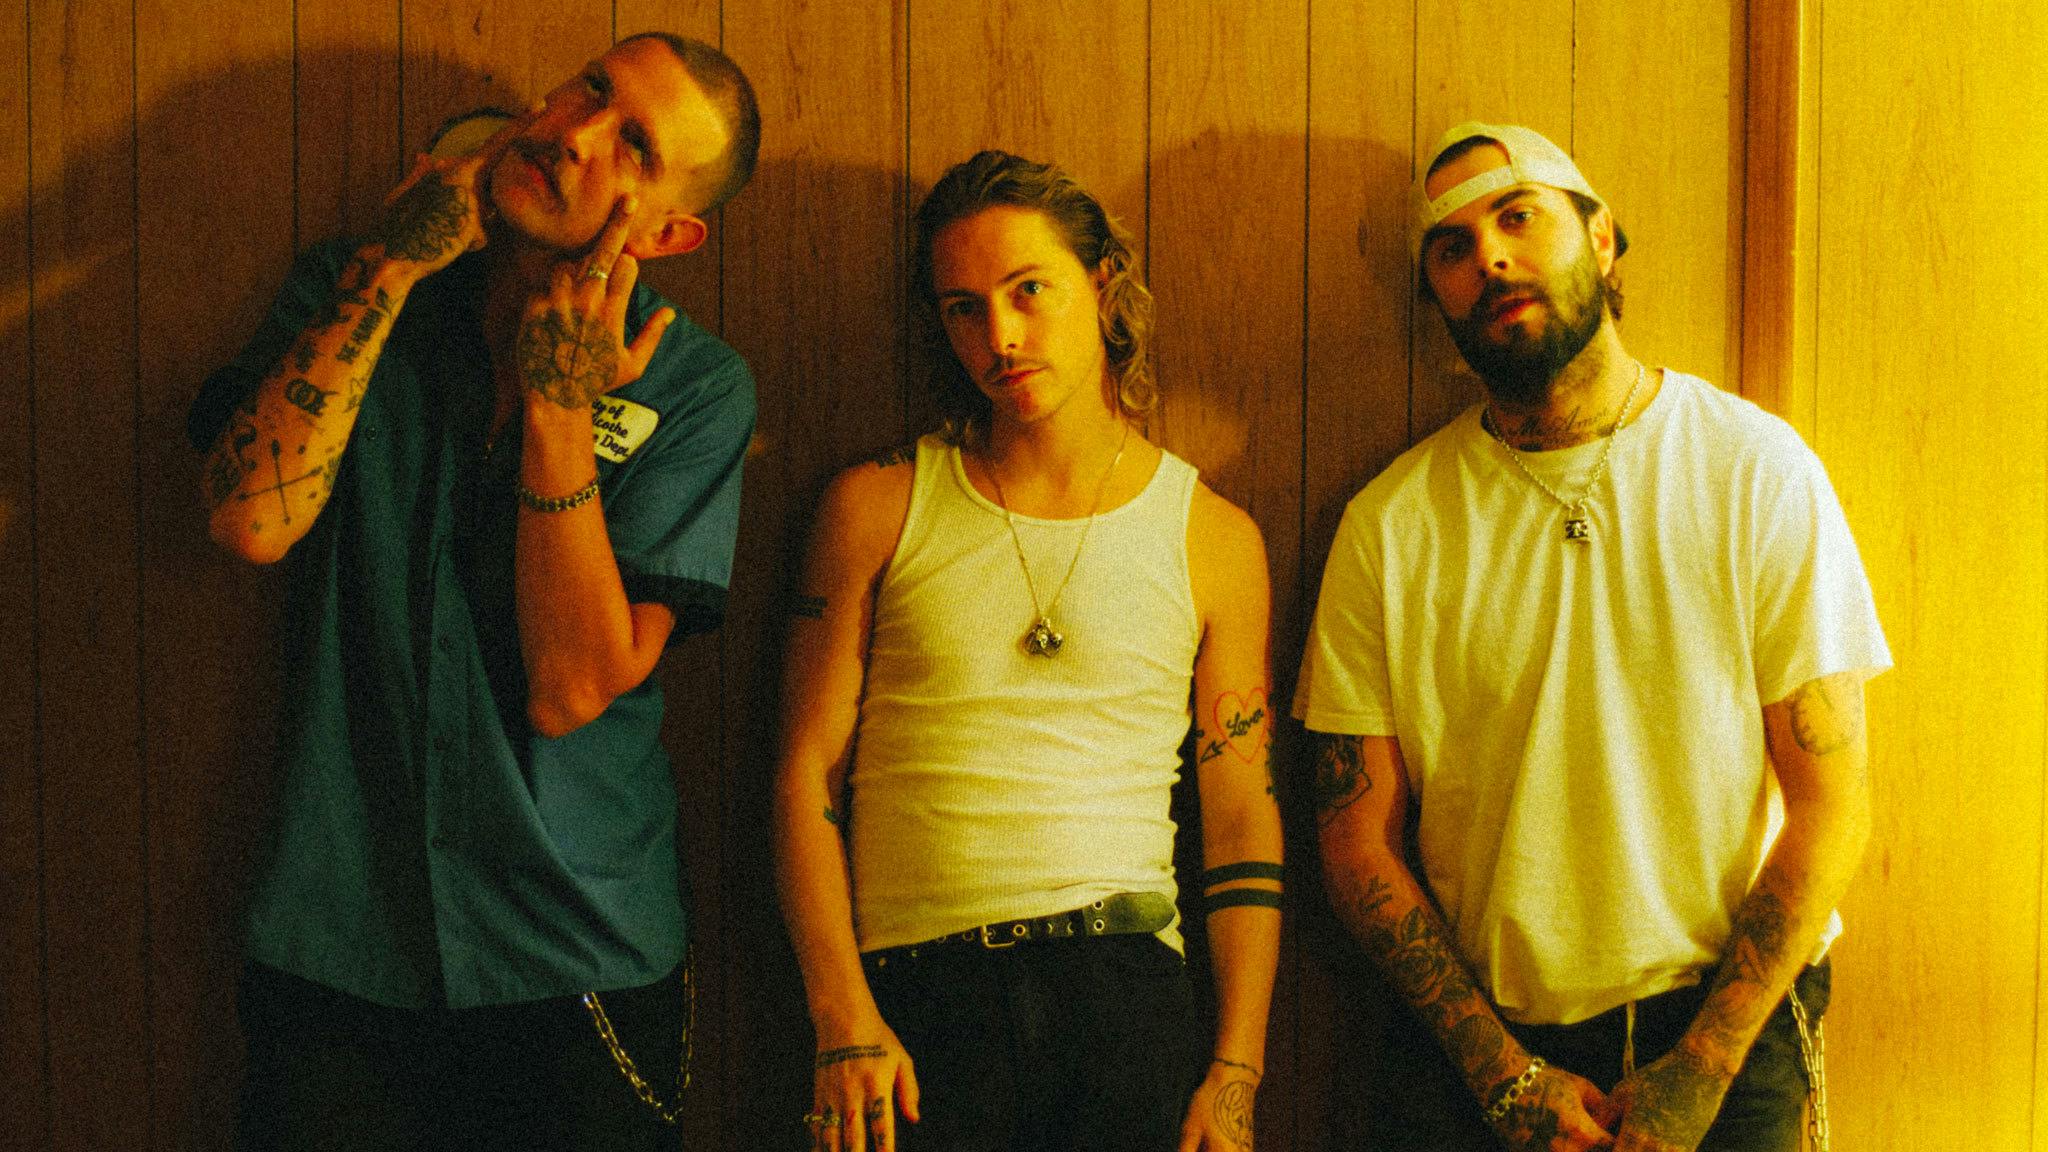 The Hunna have just announced a UK headline tour